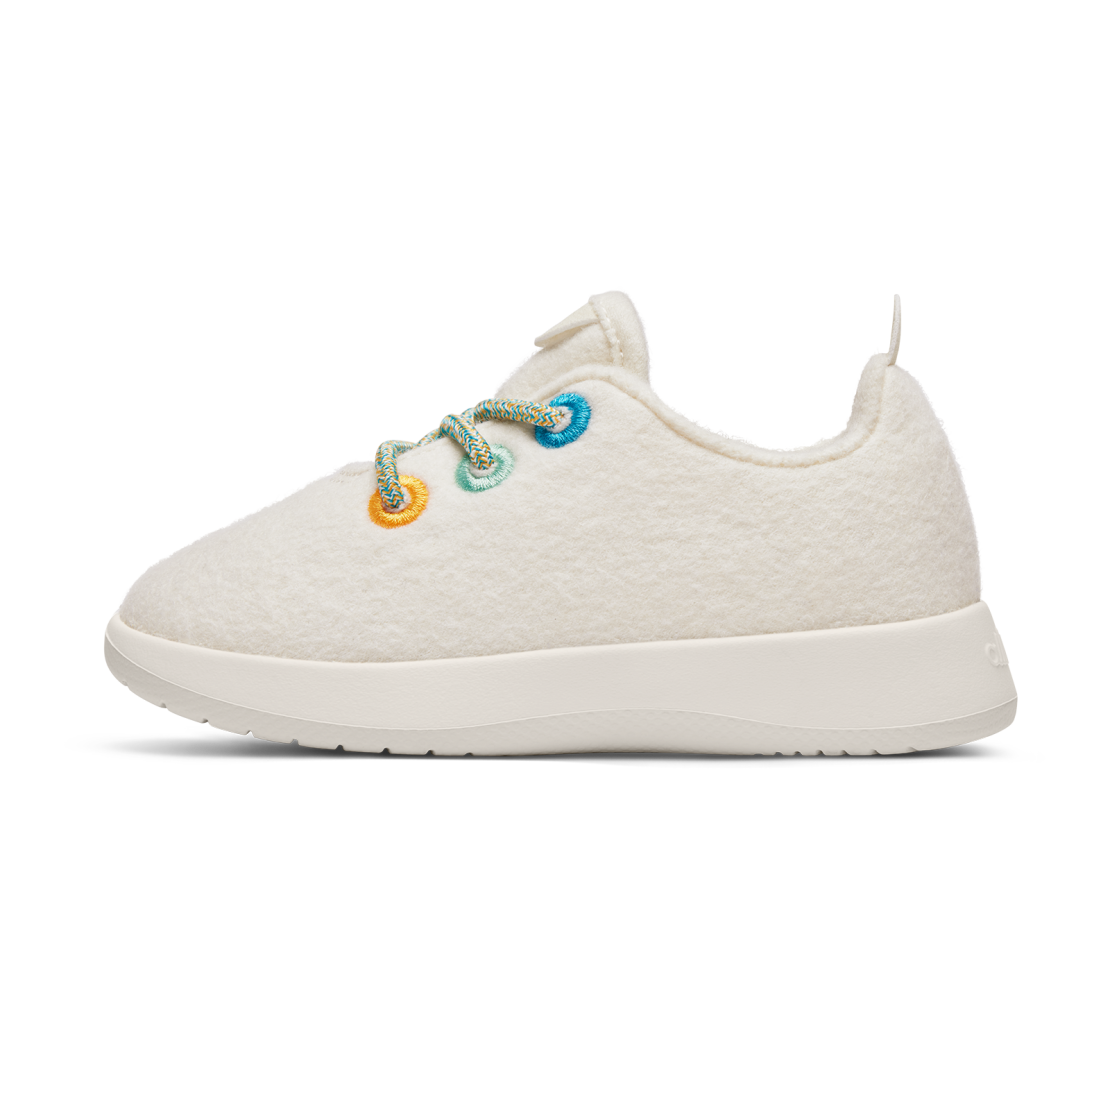 Smallbirds Wool Runners - Little Kids - Natural White (Natural White Sole)